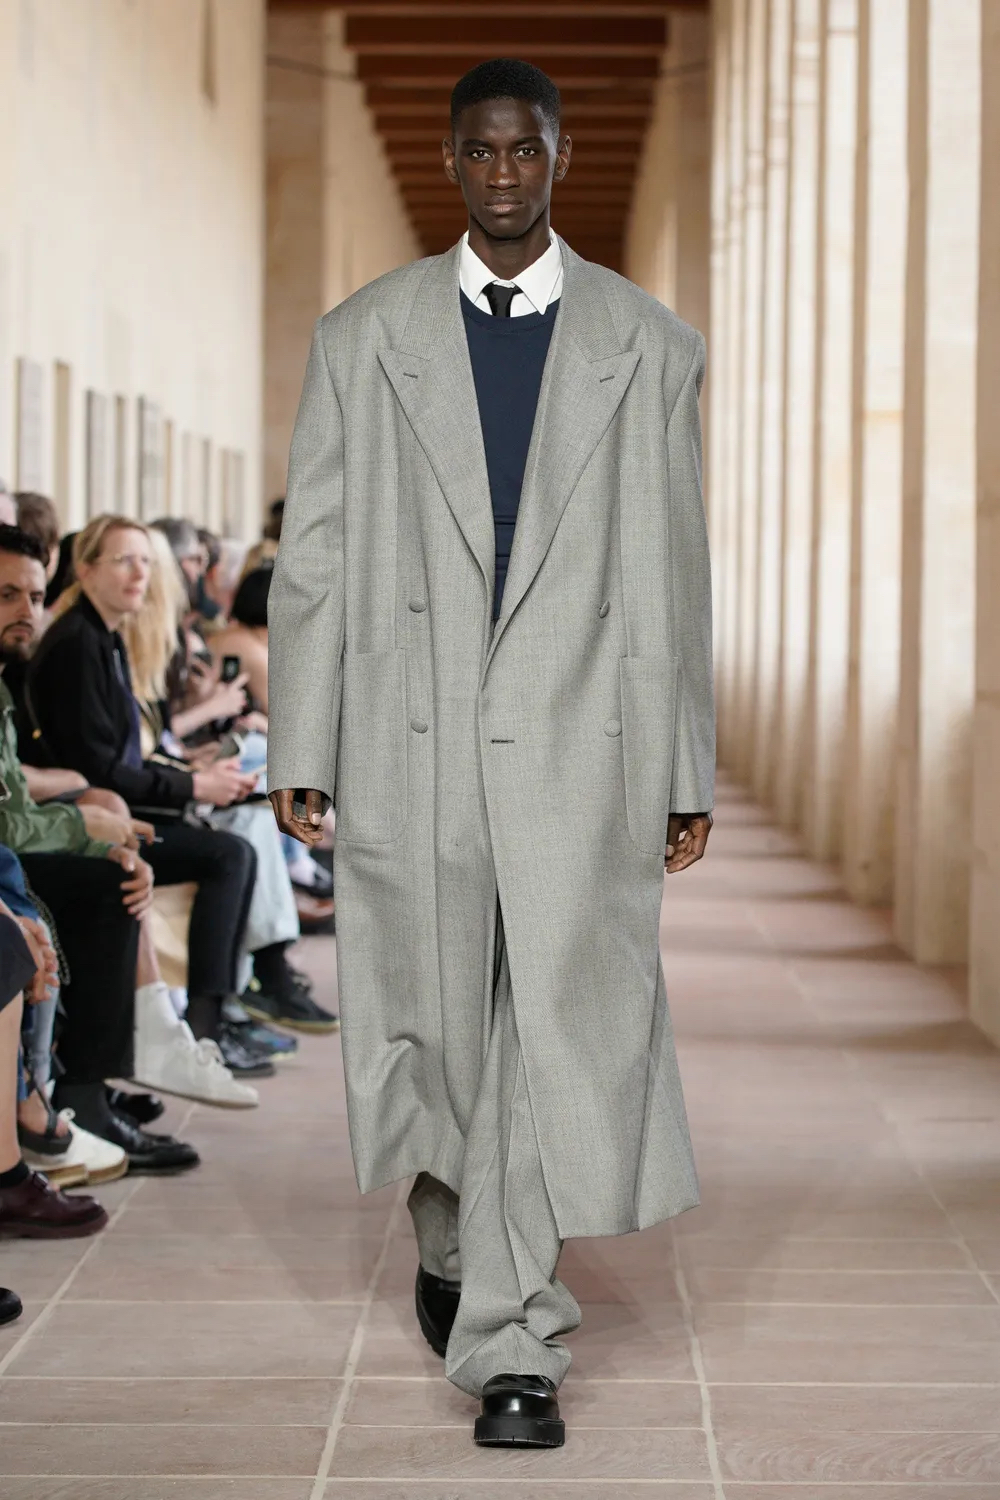 Highlights from the Paris Fashion Week menswear shows